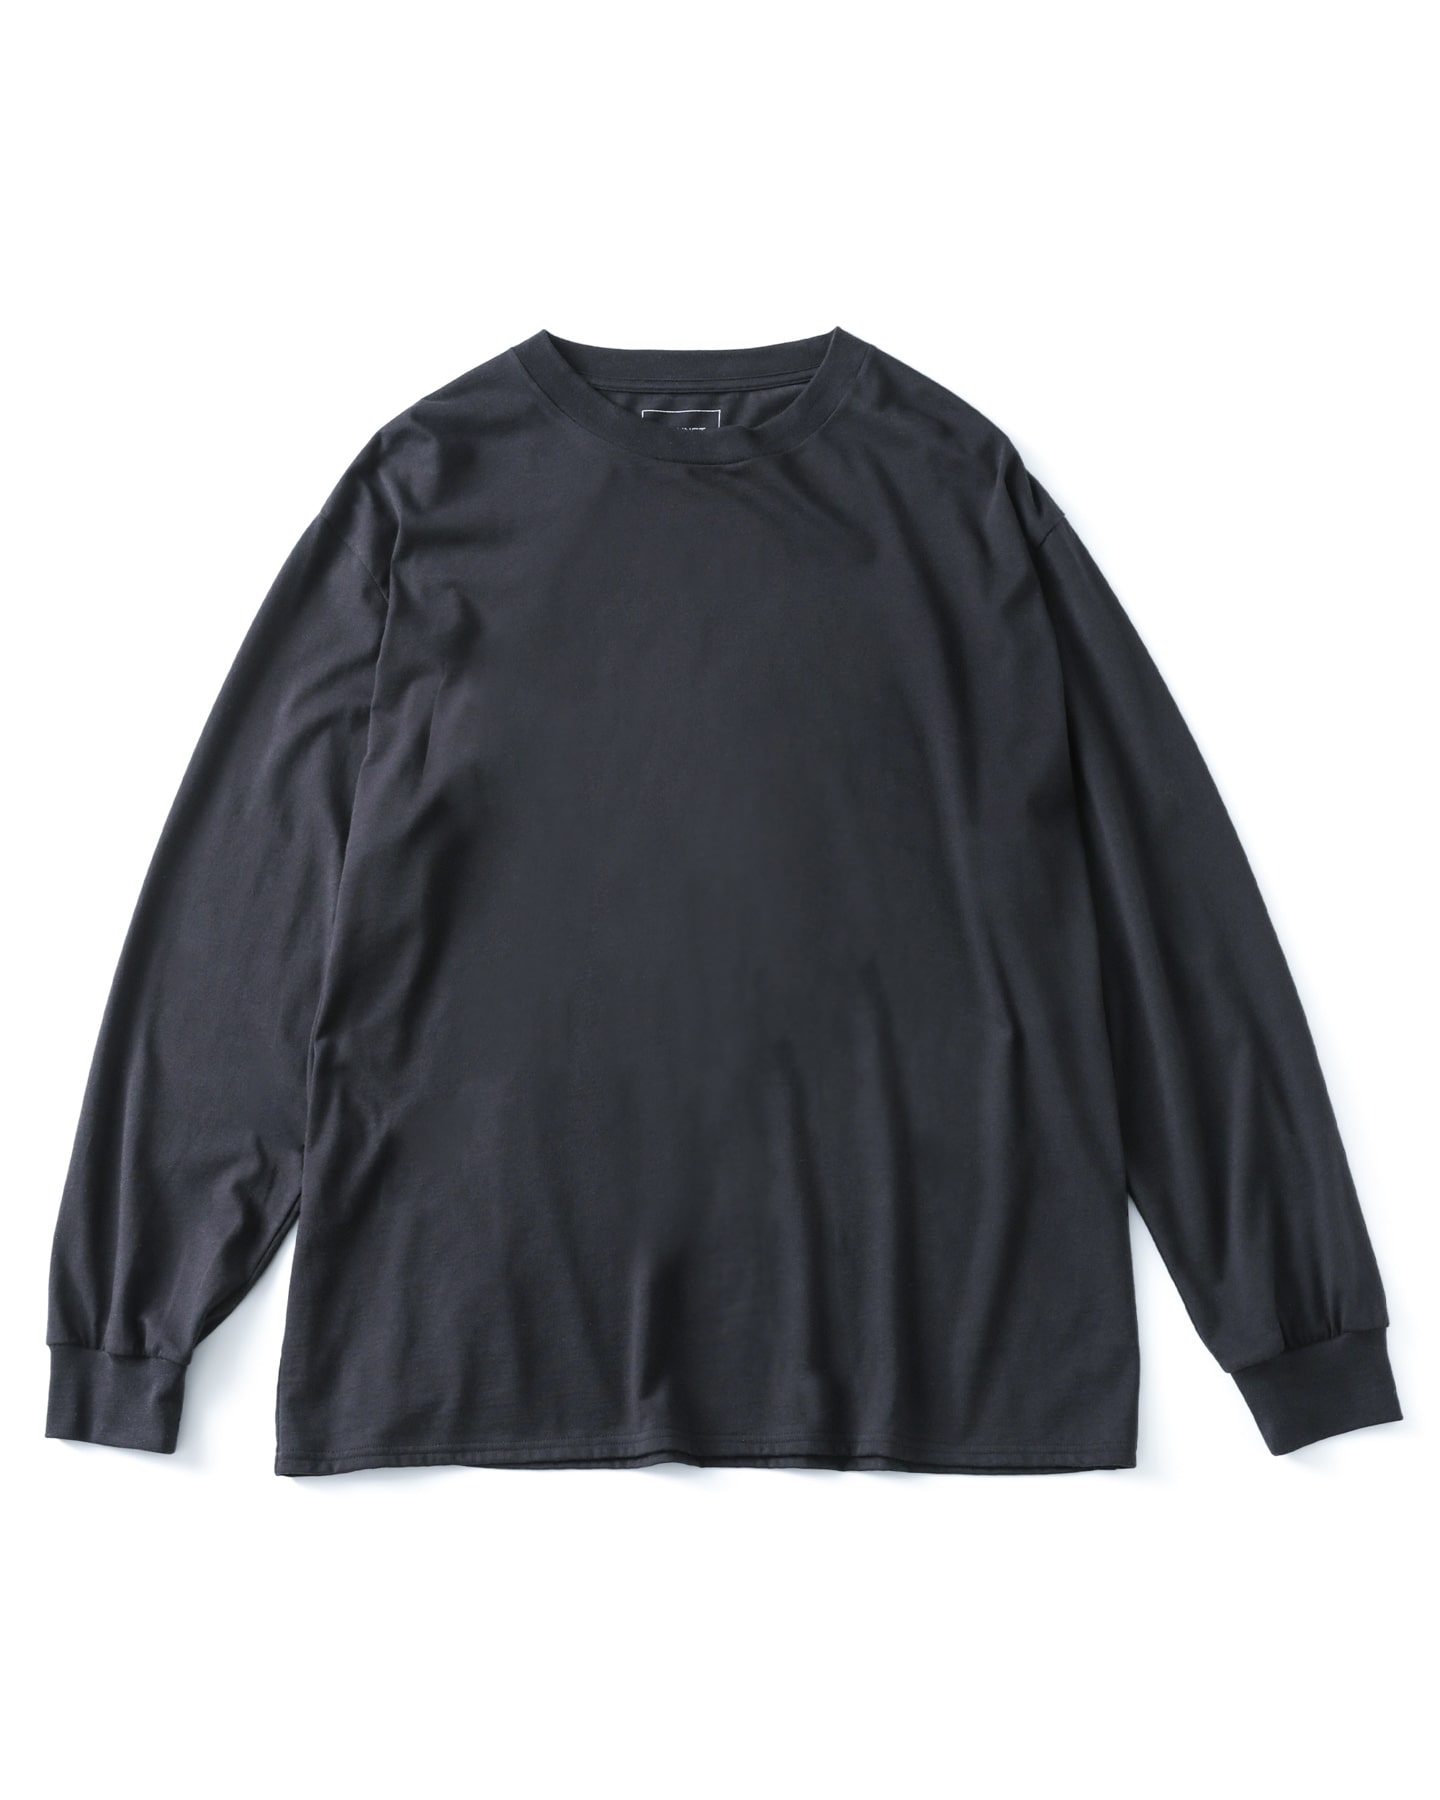 SOPH. | SUPIMA CASHMERE L/S BAGGY TEE(M BLACK):